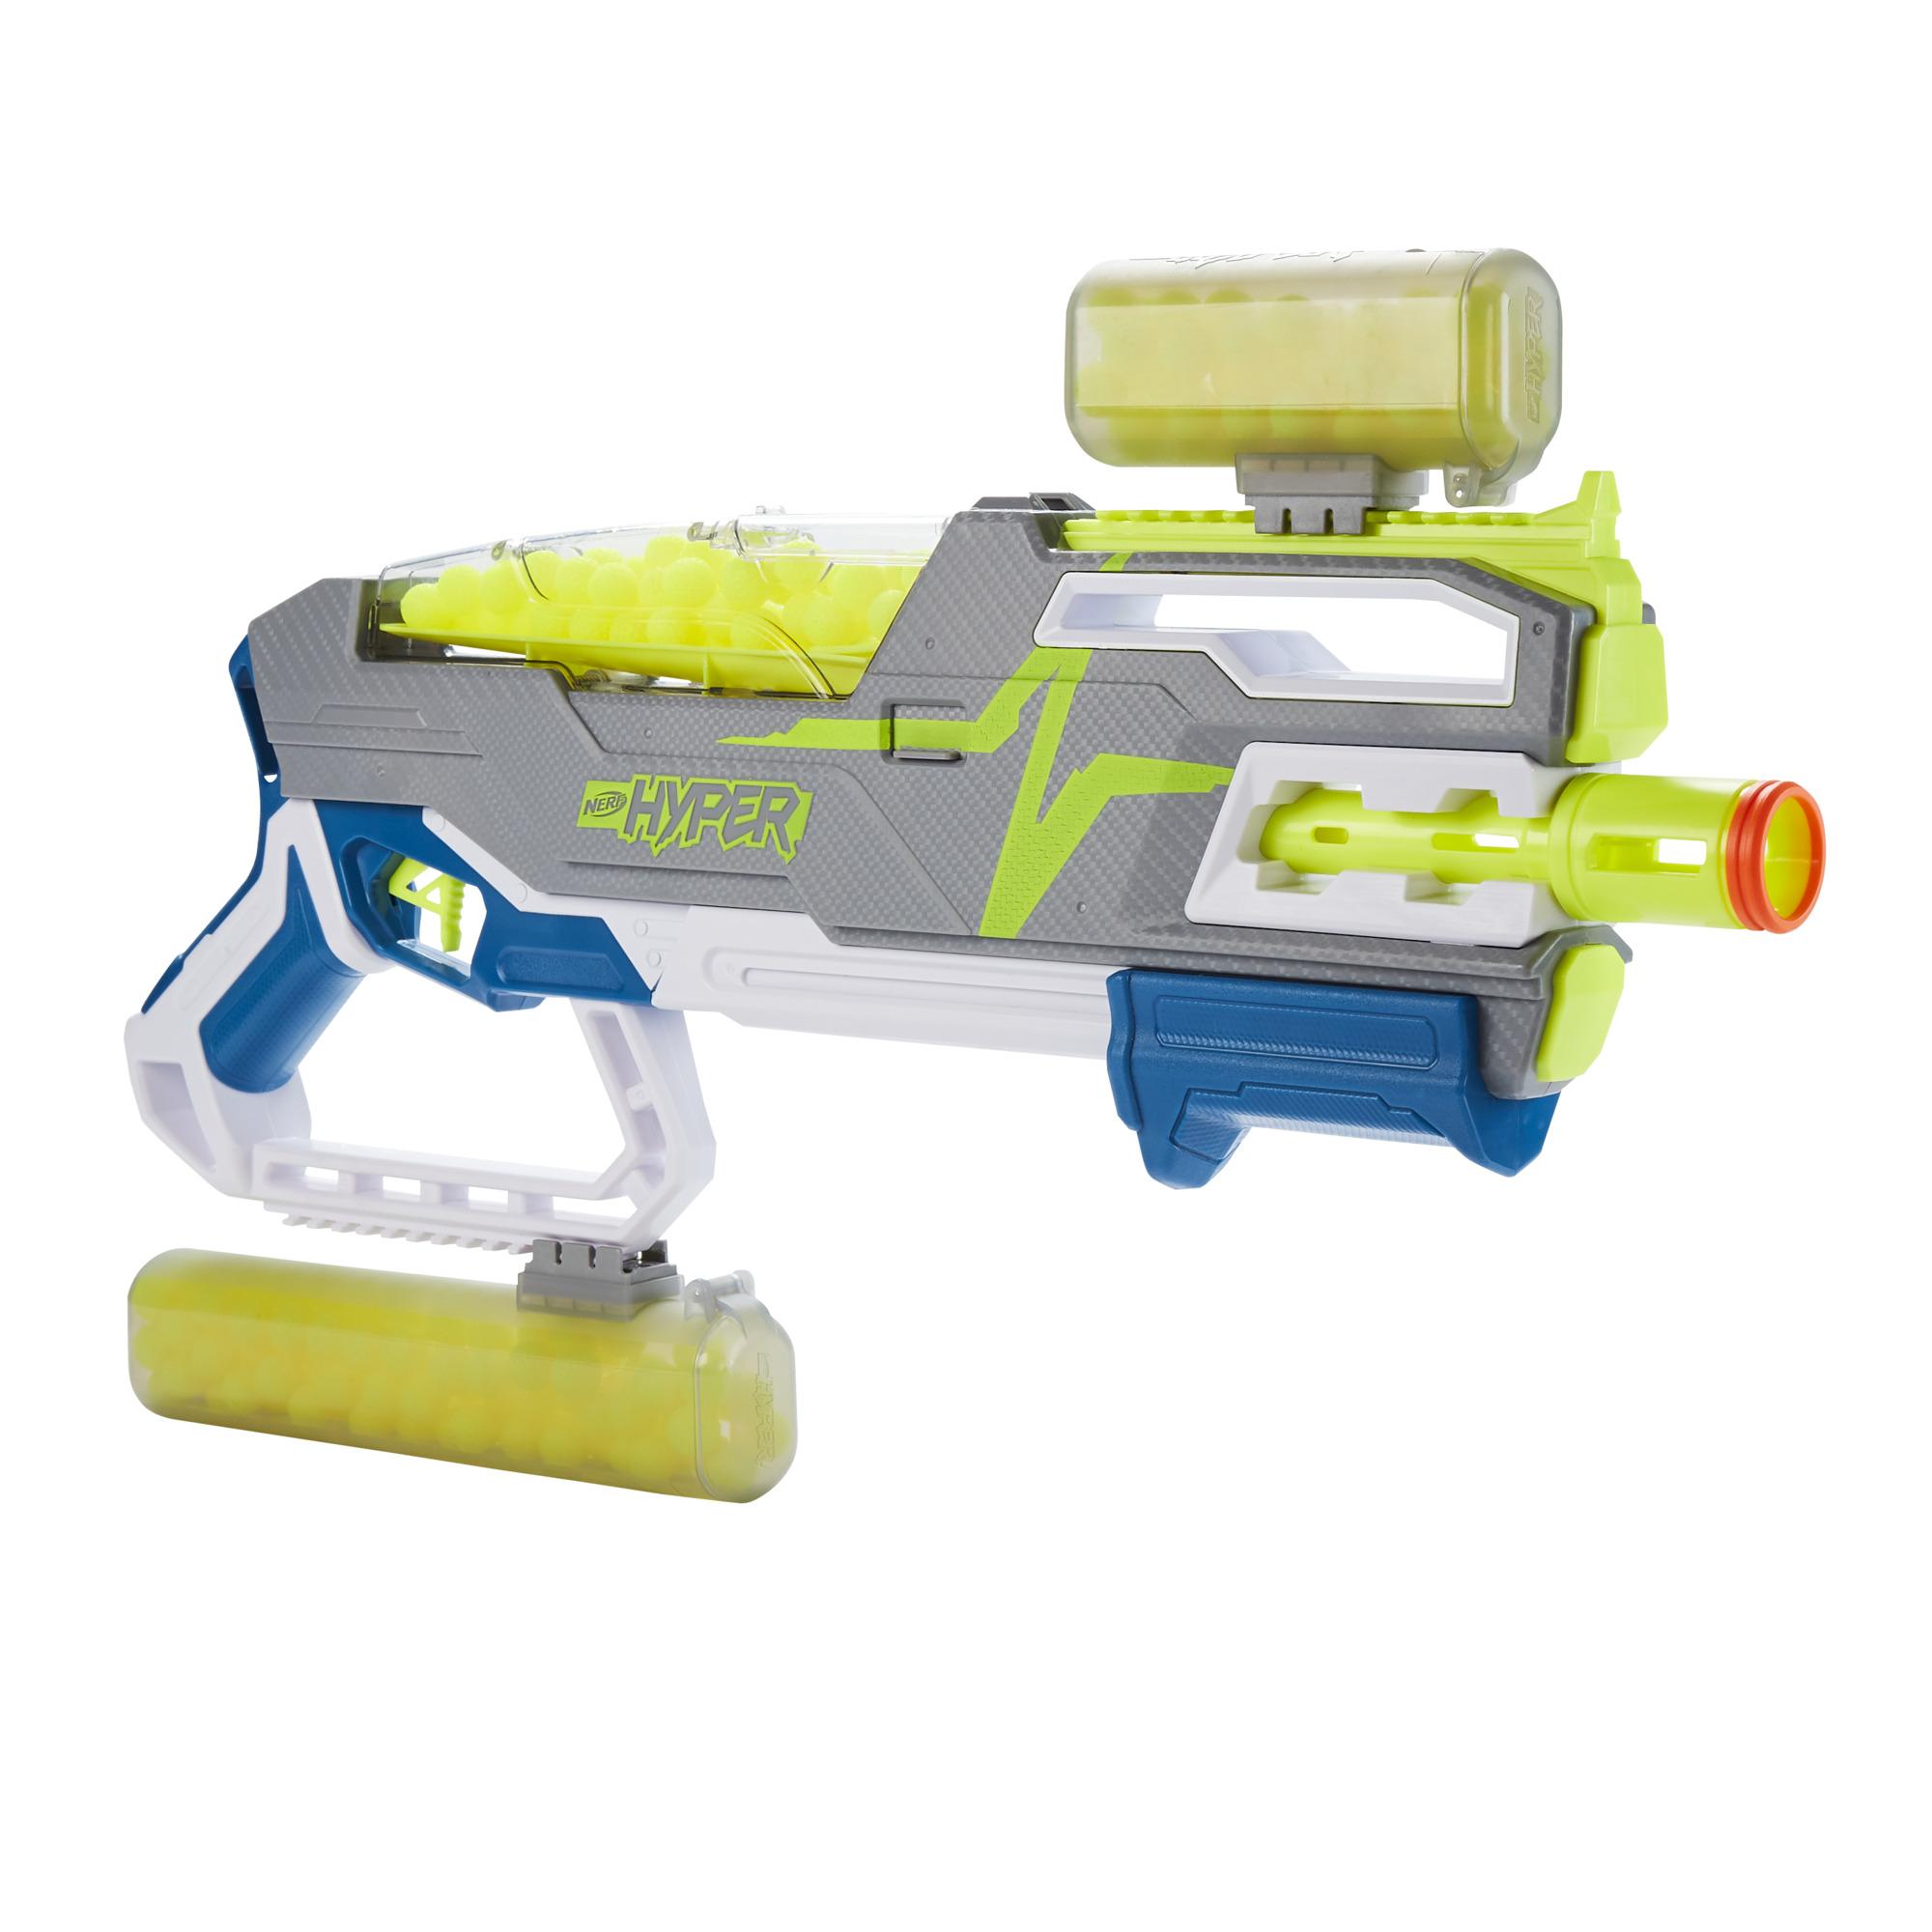 Nerf Hyper Siege-50 Pump-Action Blaster and 40 Nerf Hyper Rounds 